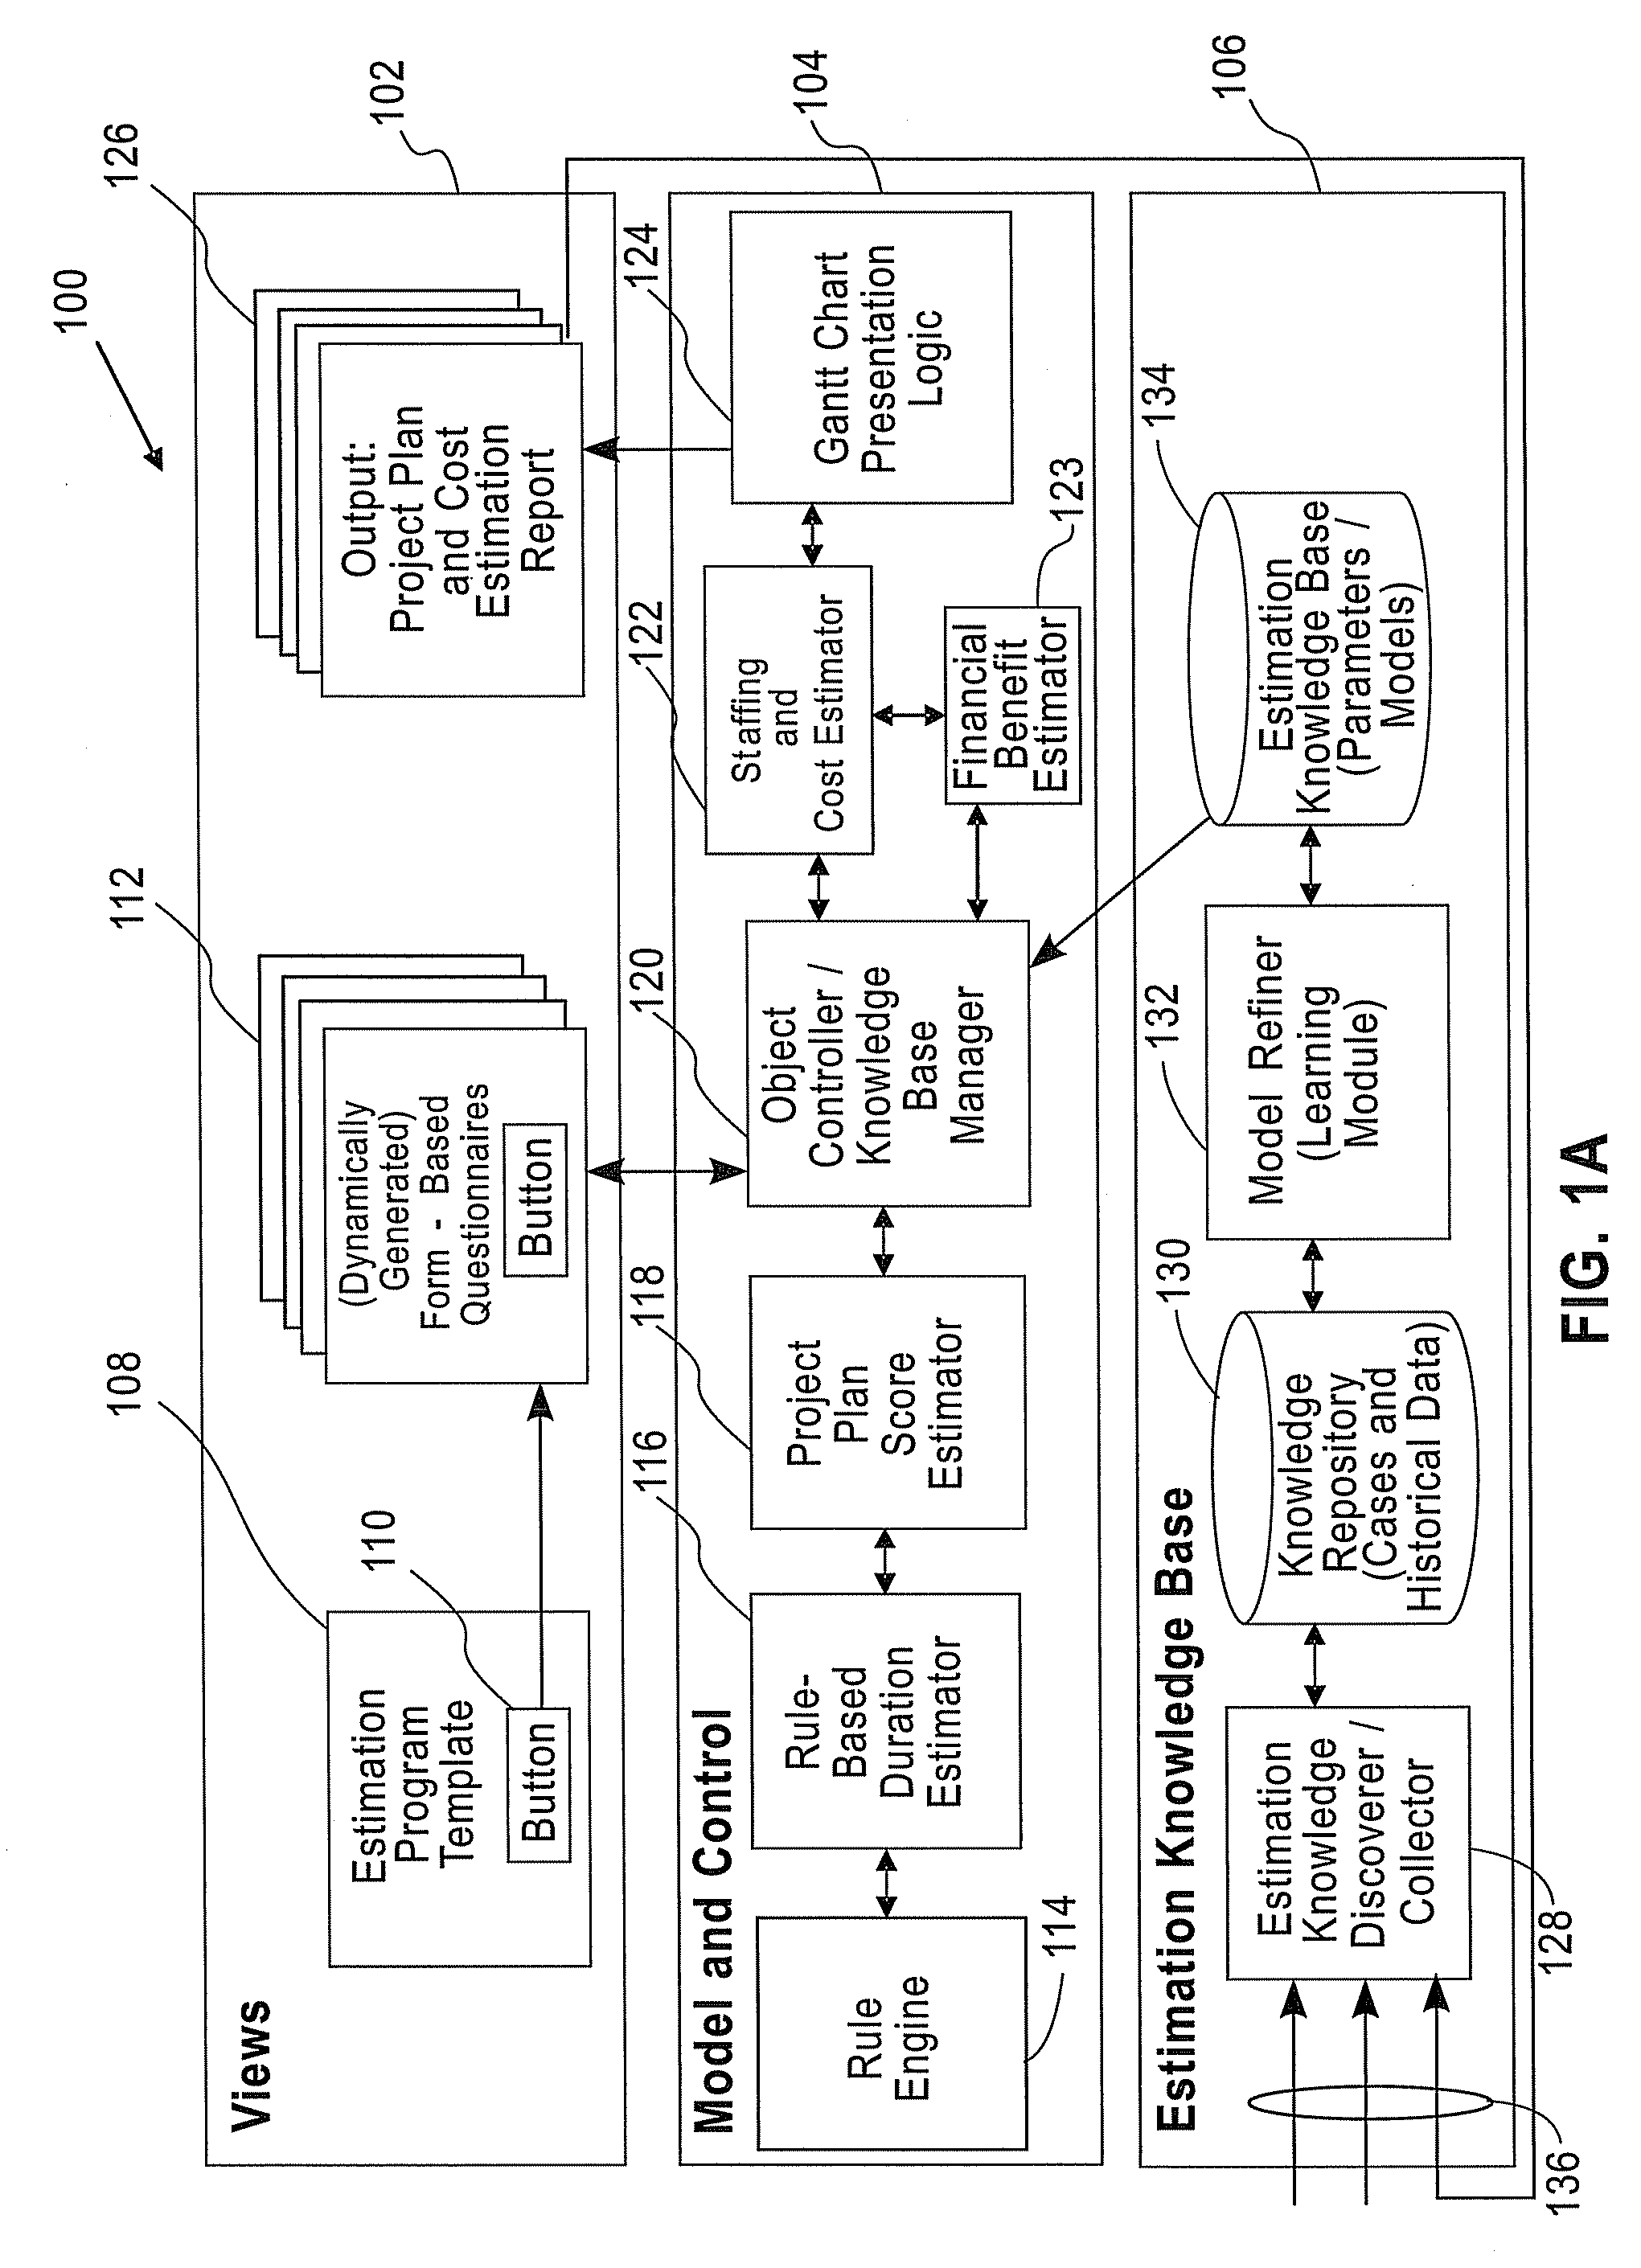 Method and system for staffing and cost estimation models aligned with multi-dimensional project plans for packaged software applications